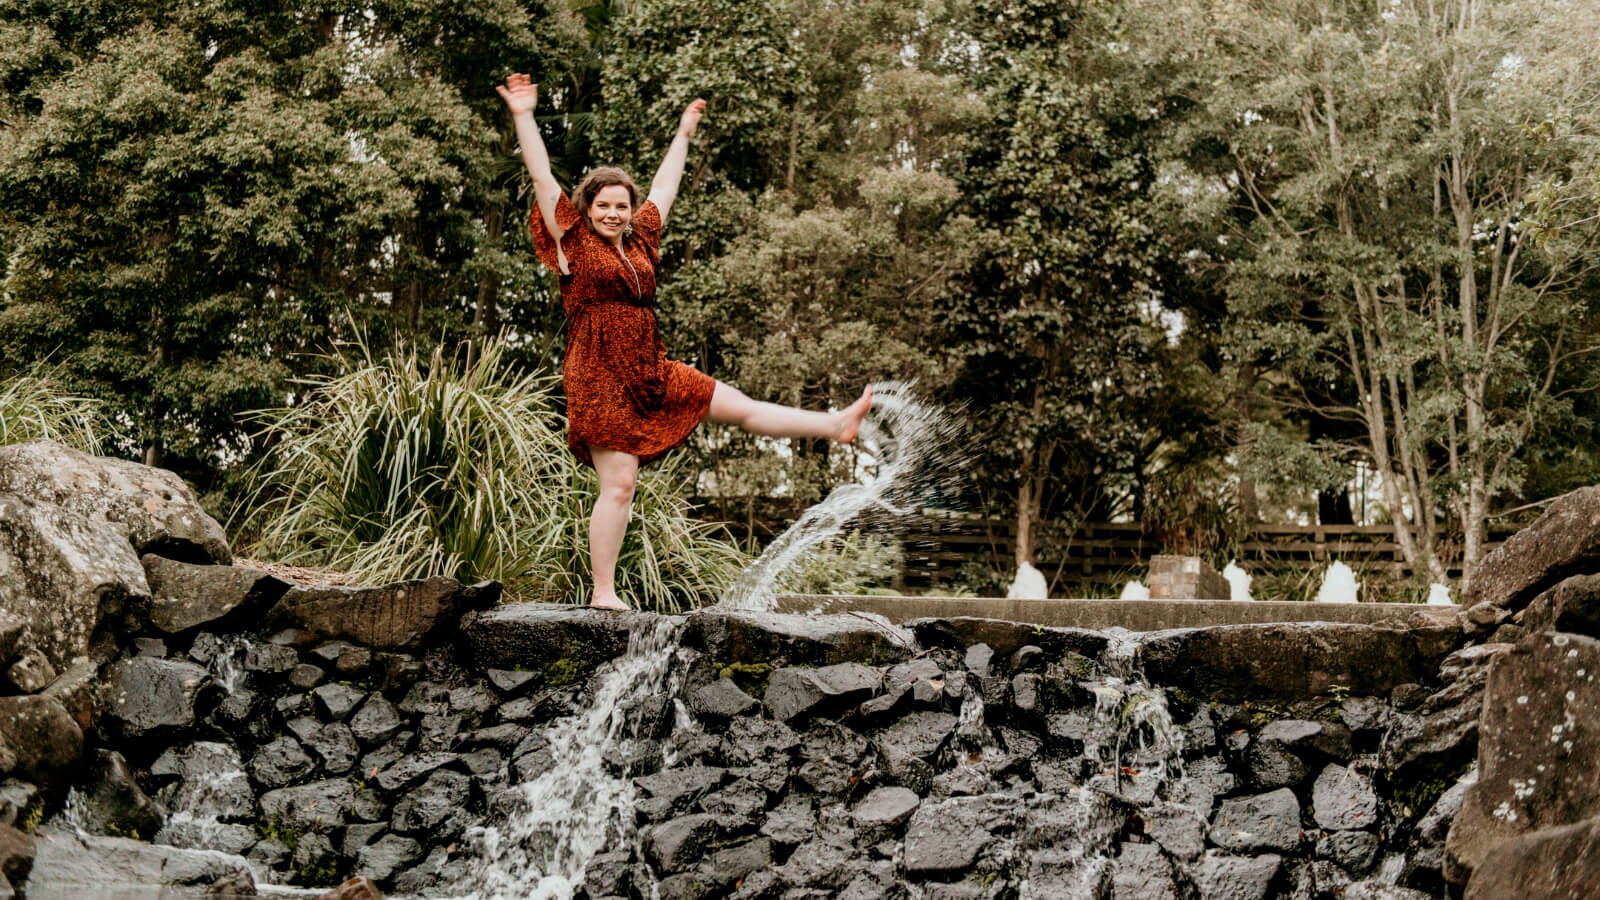 An example of authentic expression. Showing the emotion of joy. Chantelle (woman) with hands up in the air, smile on her face and one leg kicking up a stream of water into the air in front of her.